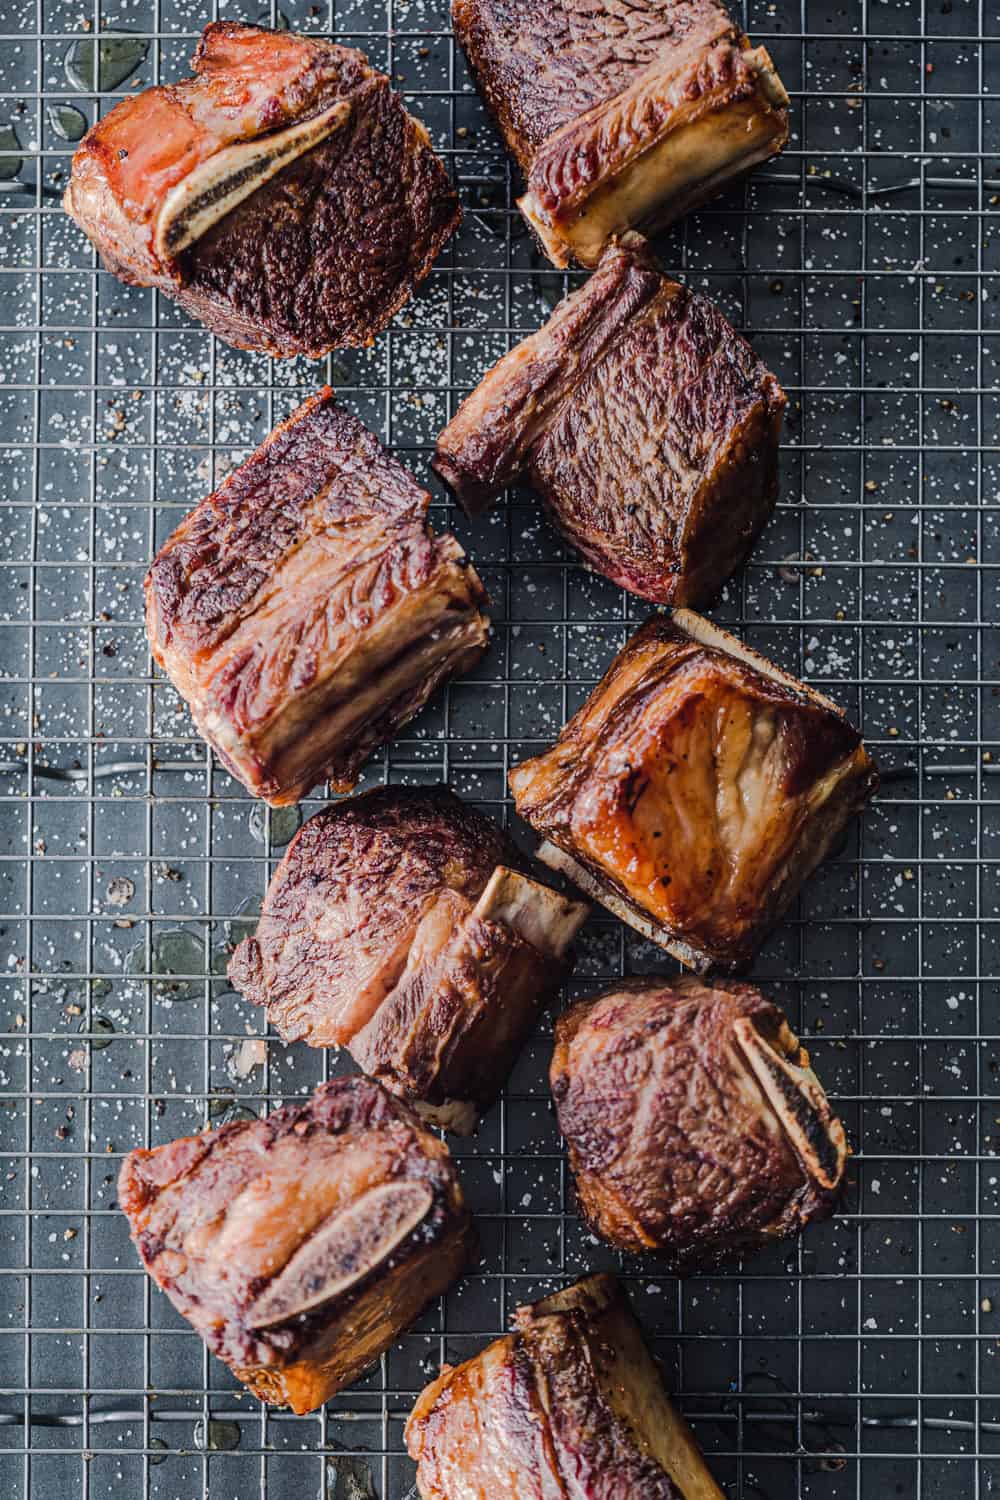 In process shot, short ribs seared on all sides, on a wire rack on a baking tray.